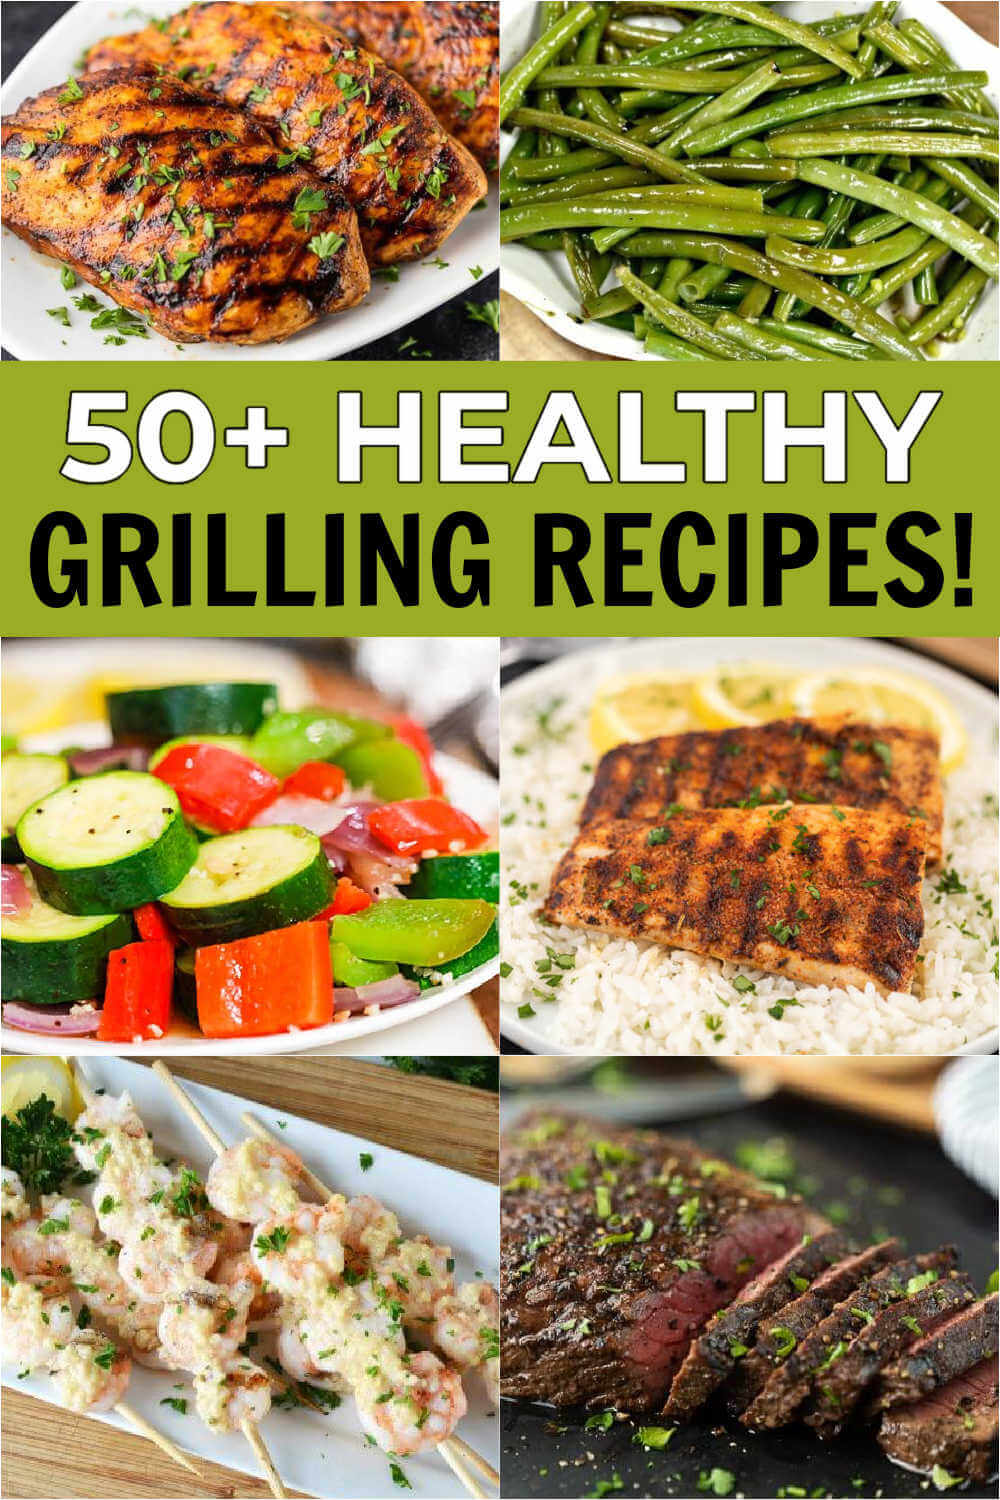 Grilling is so much fun and we have lots of easy healthy grilling recipes . From chicken and beef to veggies and more, there are tons of ideas. You’ll love these healthy grilling dinner recipes including foil packets.  #eatingonadime #healthyrecipes #grillingrecipes 
